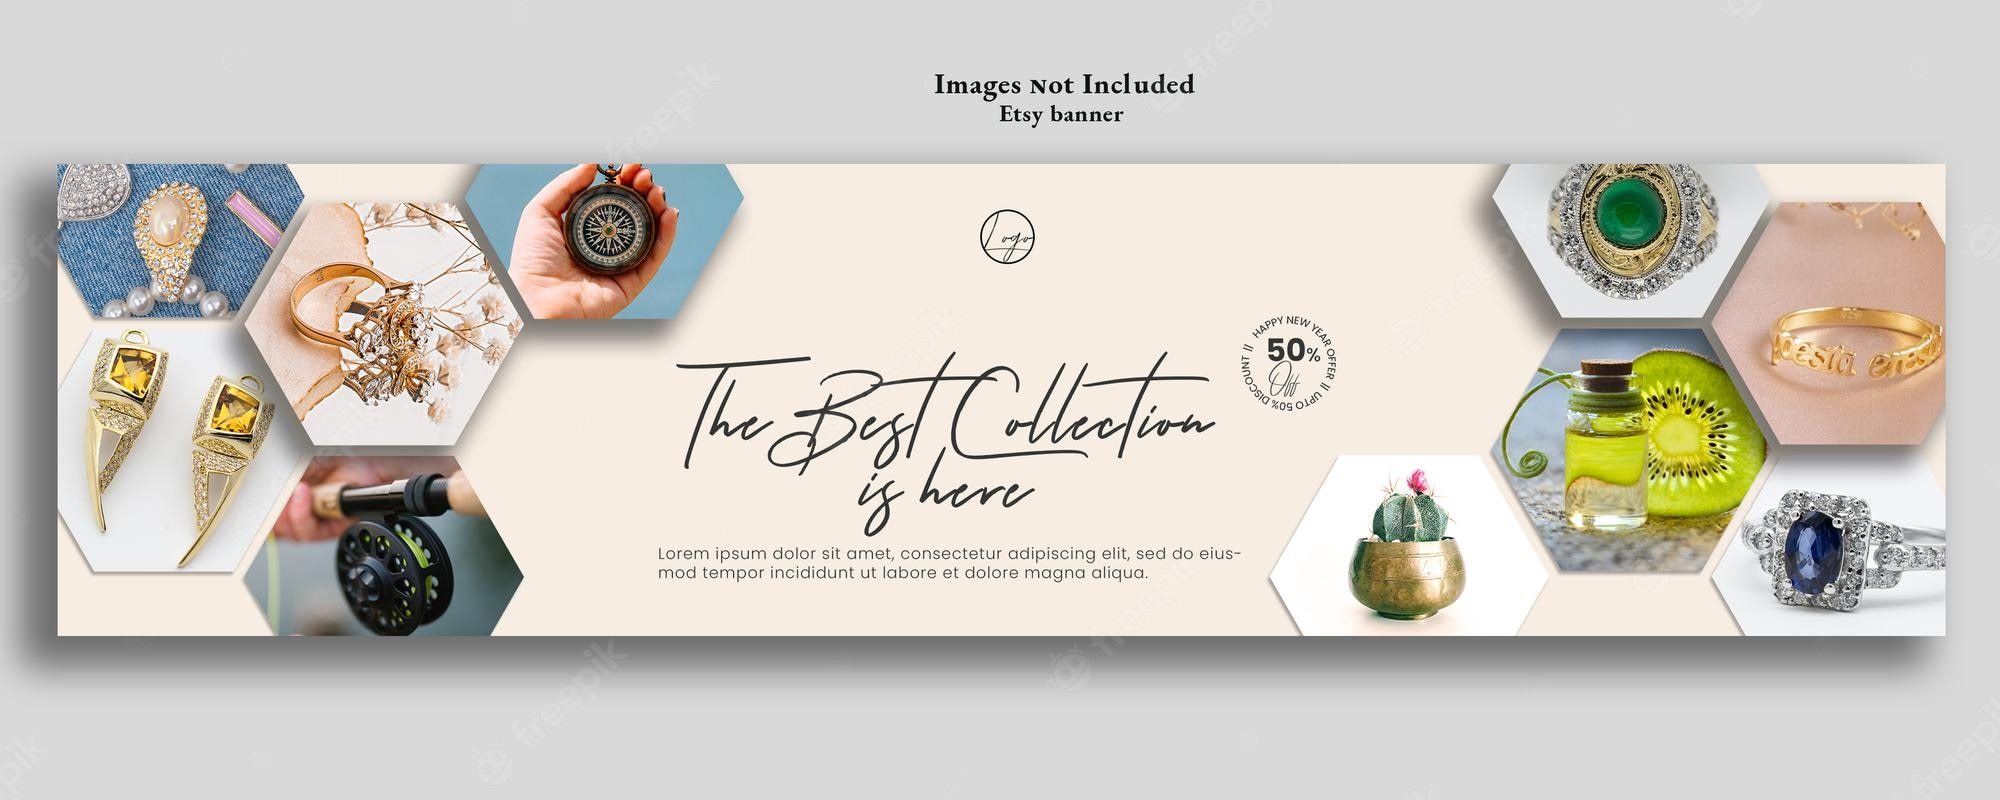 Etsy PSD, 10,10+ High Quality Free PSD Templates For Download Regarding Free Etsy Banner Template